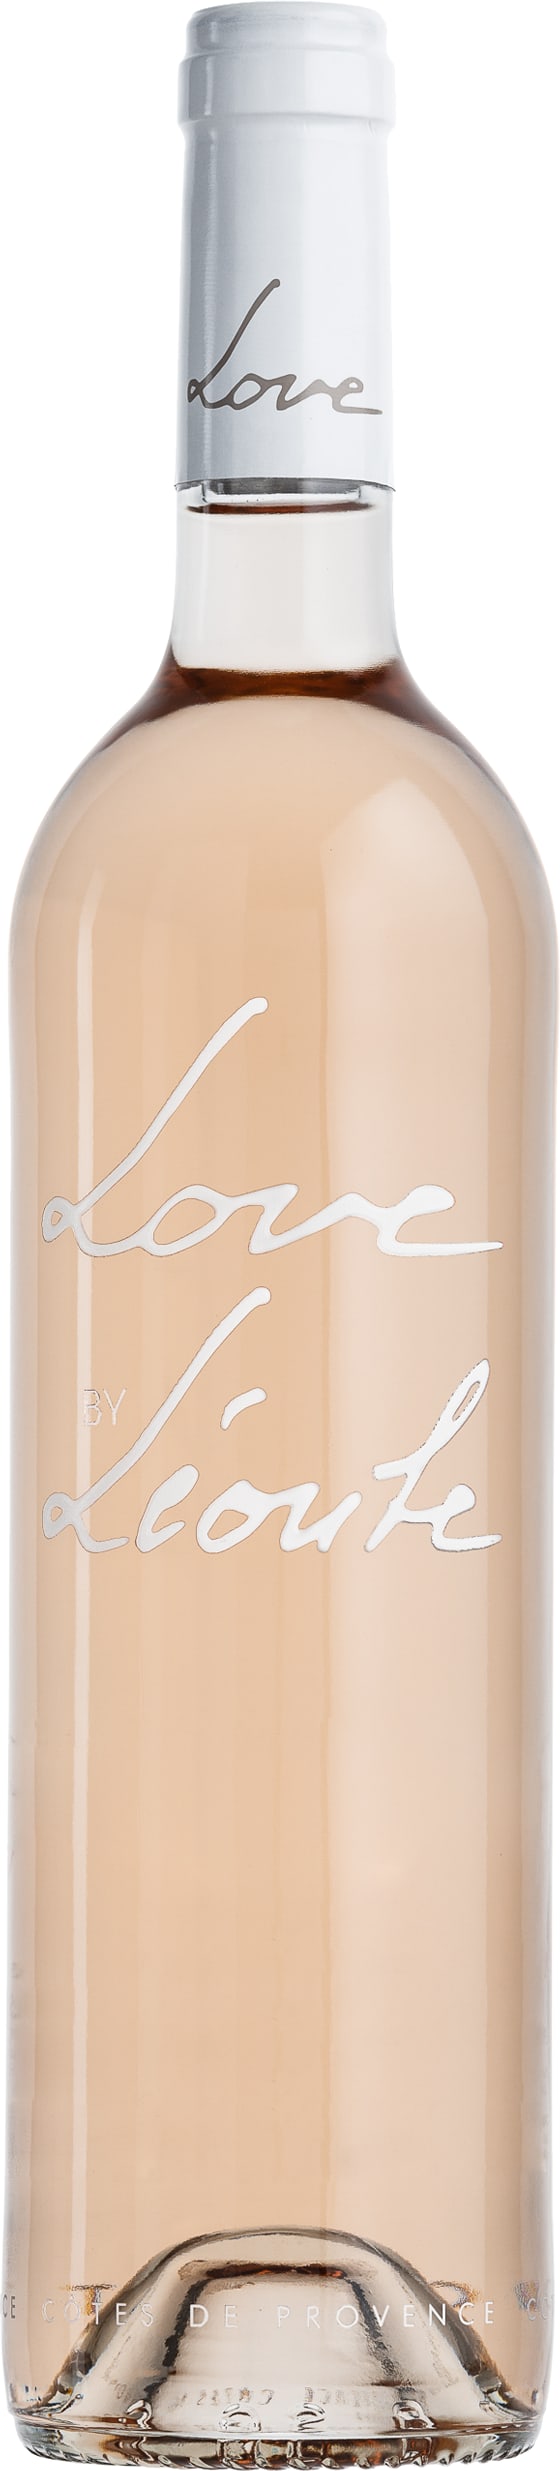 Chateau Leoube Love by Leoube Organic Rose 2021 150cl - Buy Chateau Leoube Wines from GREAT WINES DIRECT wine shop